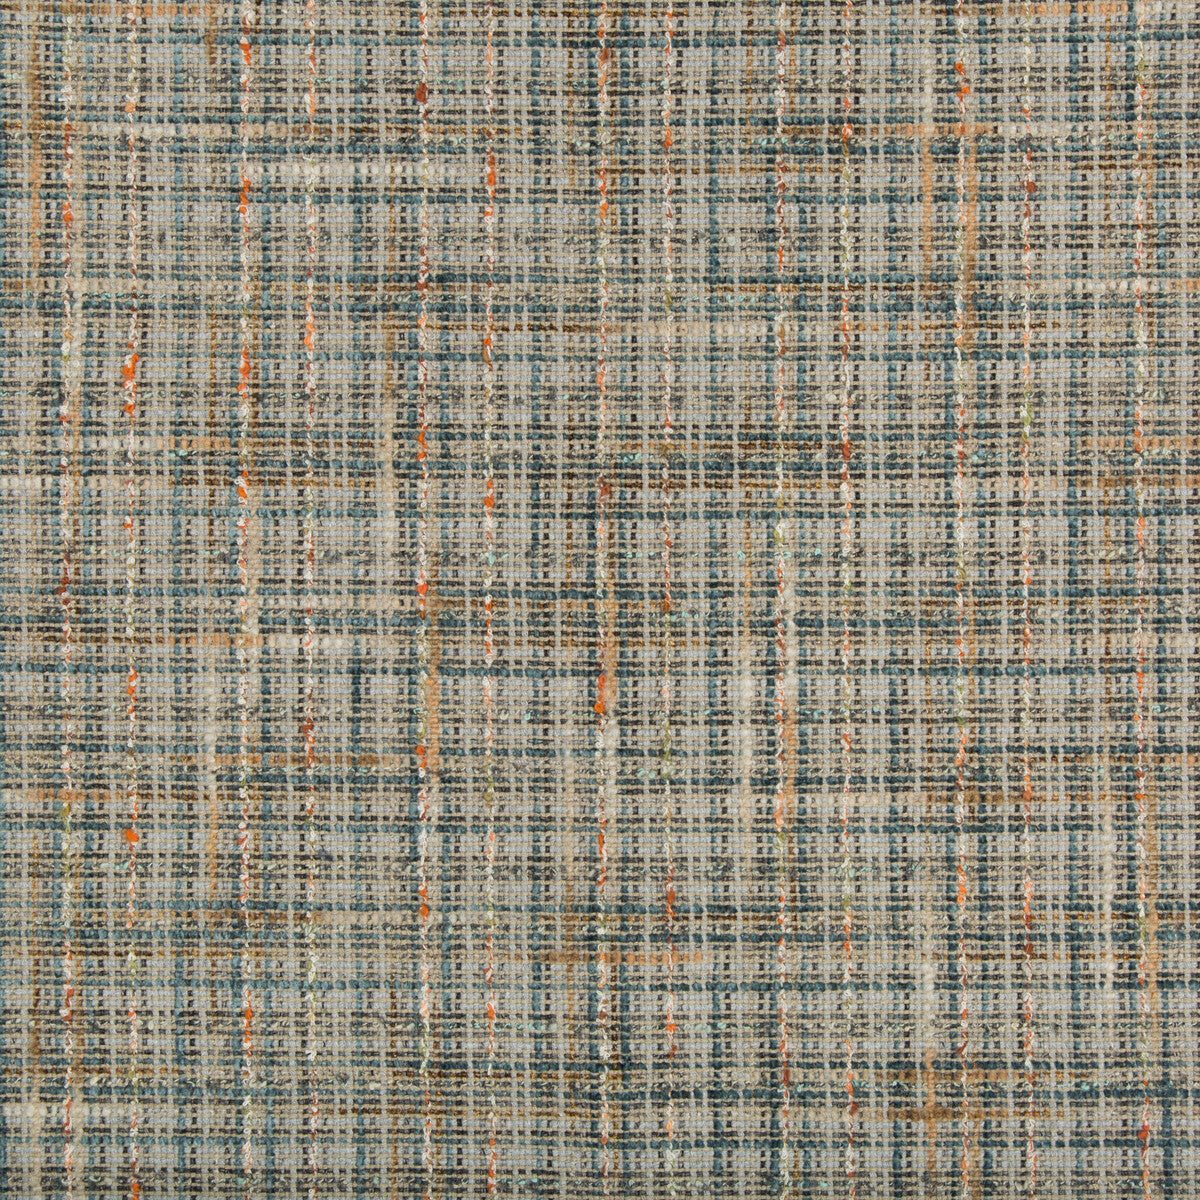 Hapertas fabric in heron color - pattern 35308.1512.0 - by Kravet Couture in the David Phoenix Well-Suited collection